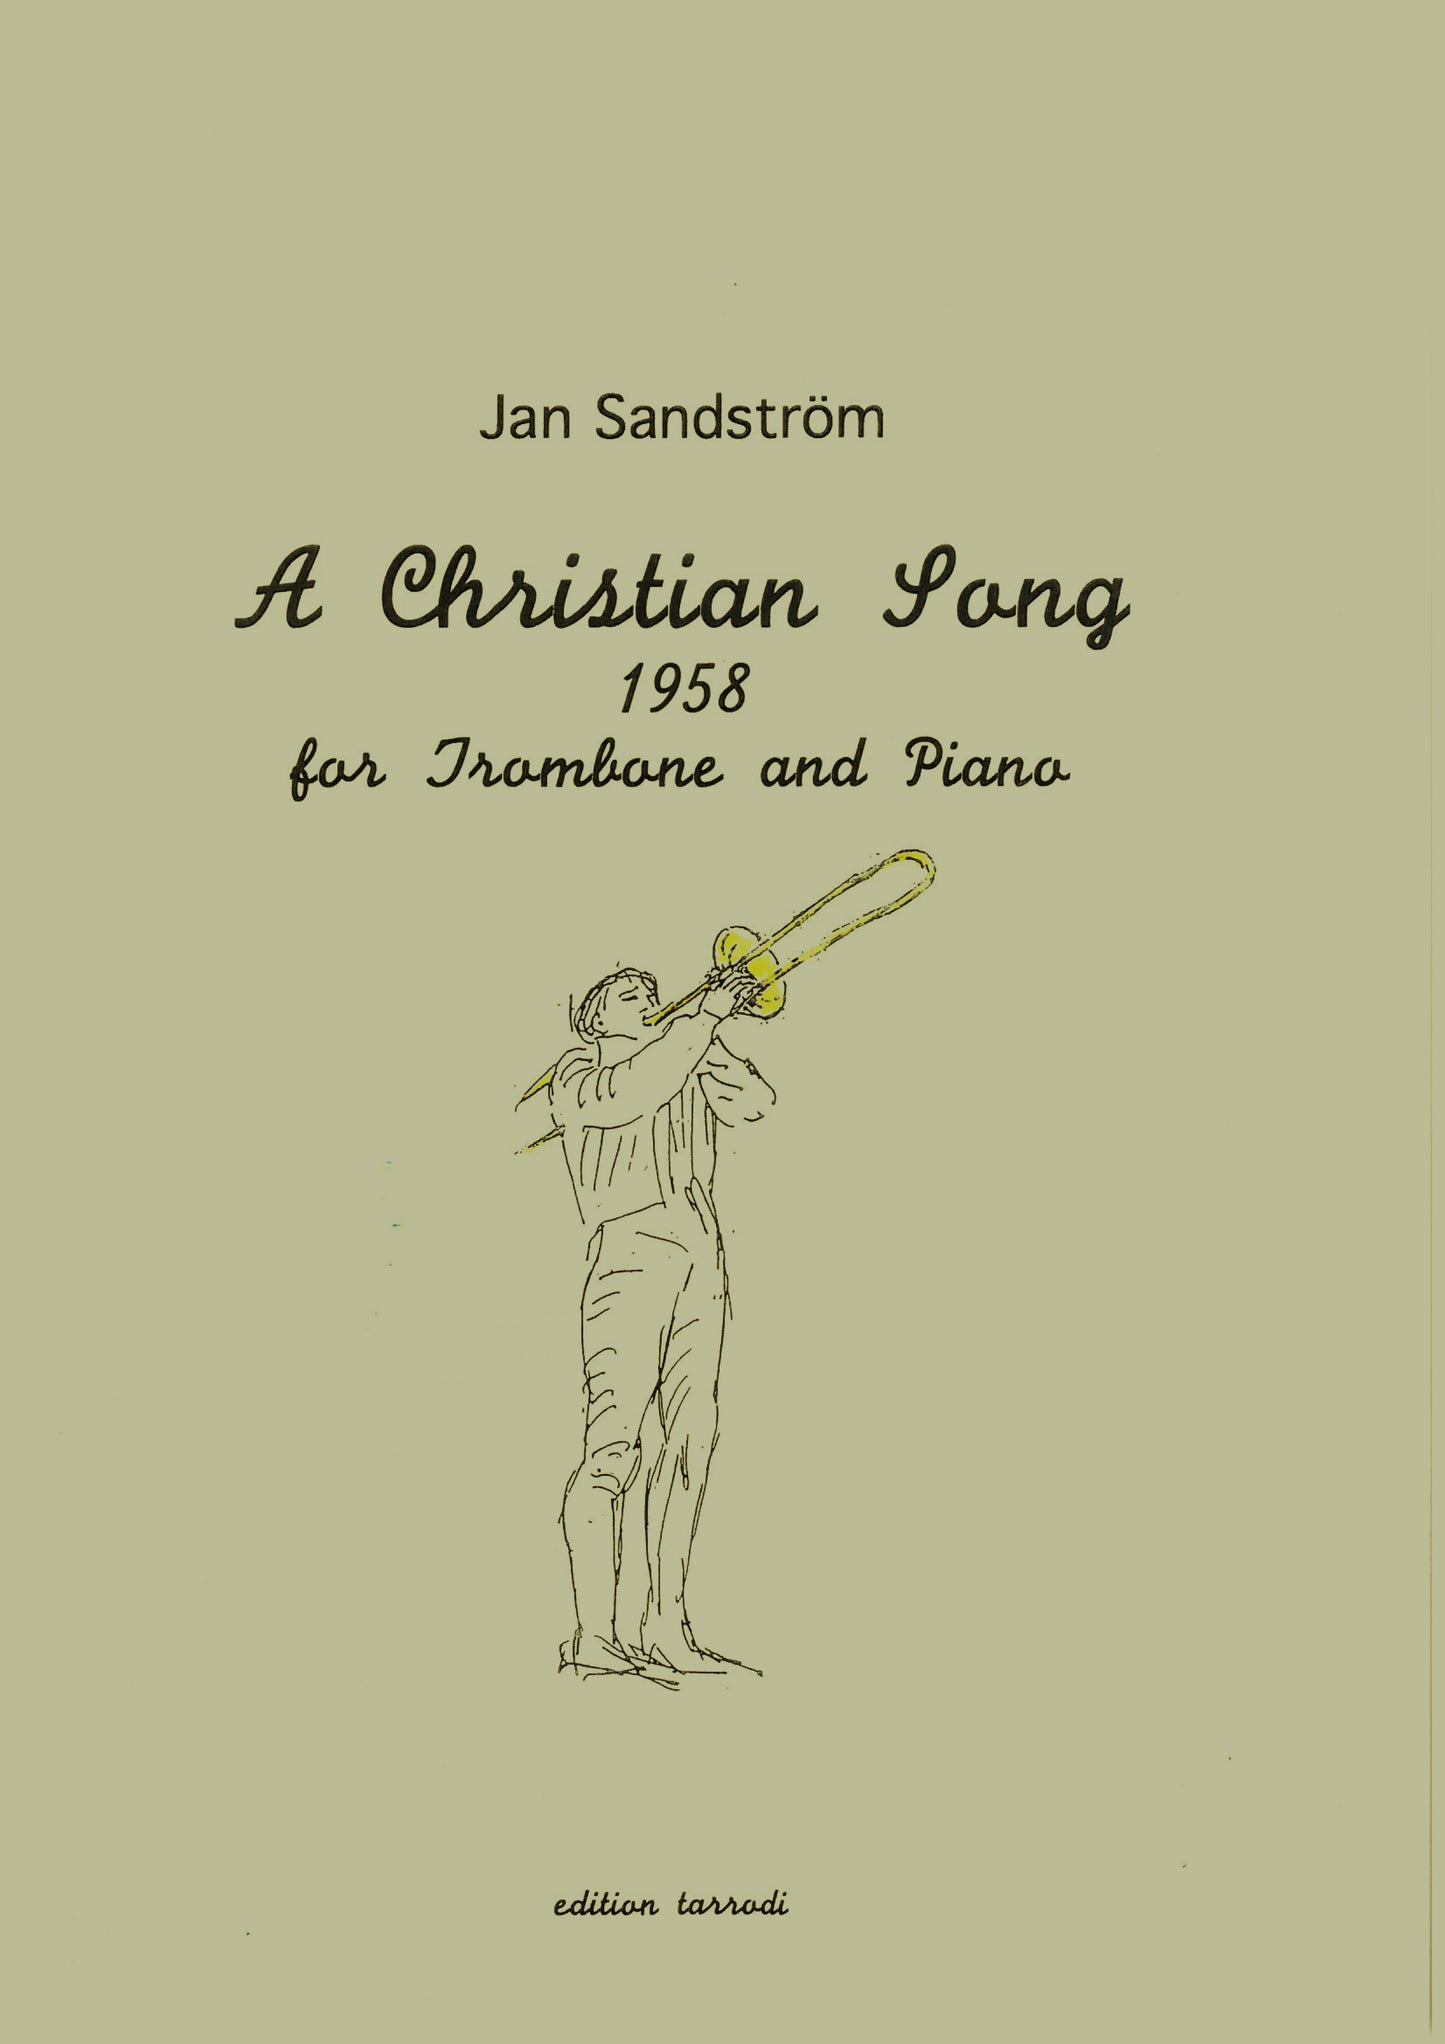 Jan Sandström - A Christian Song,  1 Trombone and Piano